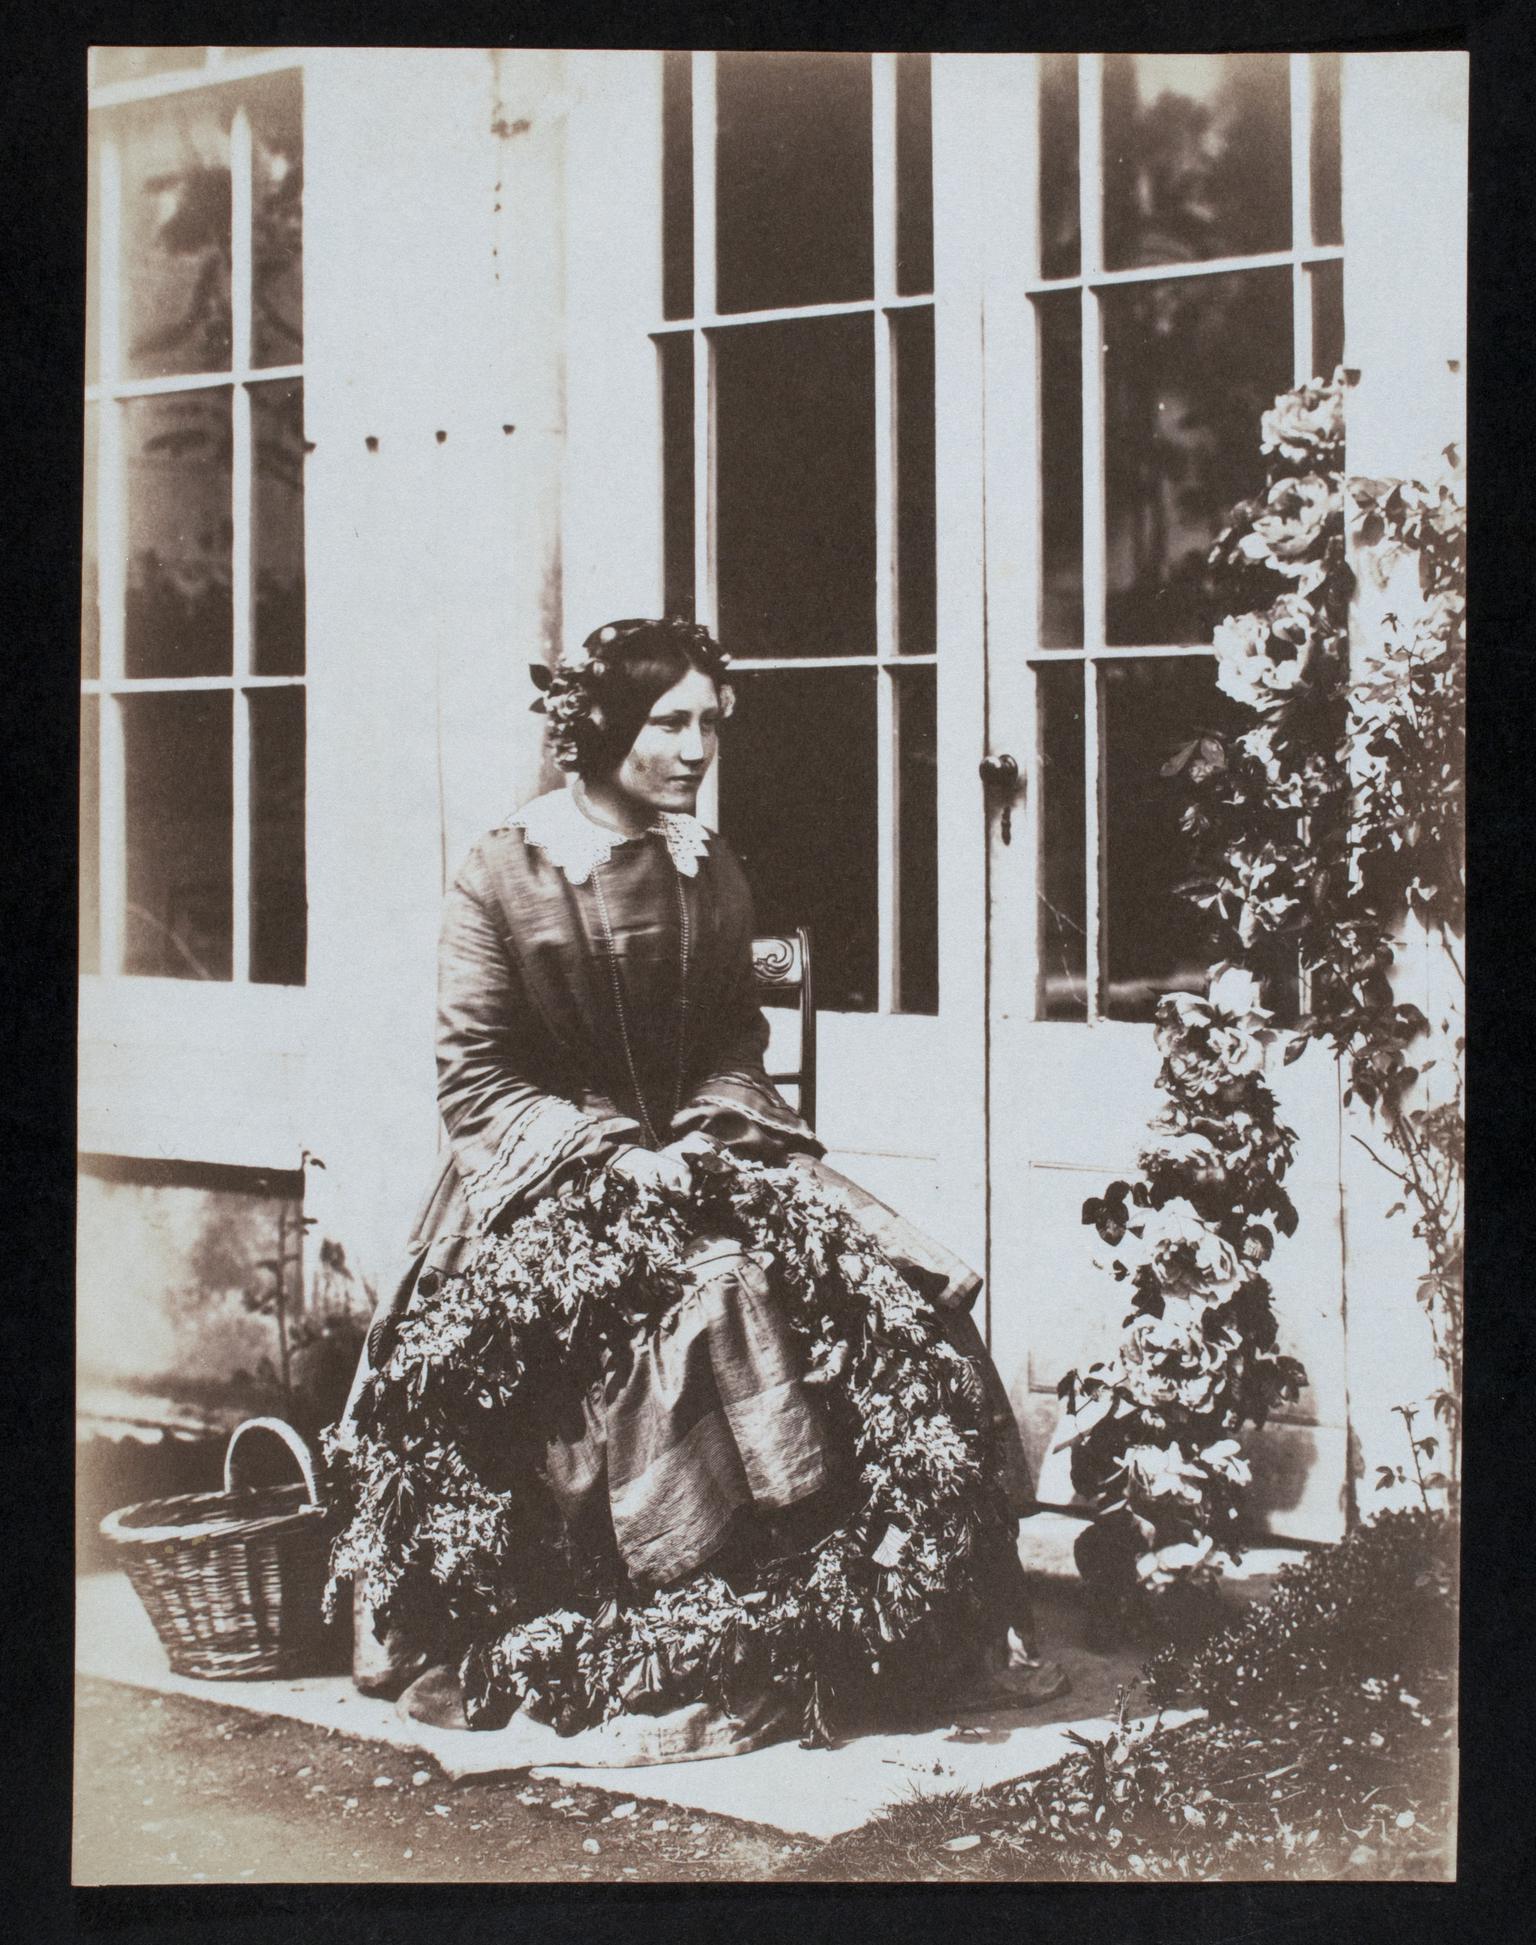 Thereza Llewelyn with flower wreath, photograph